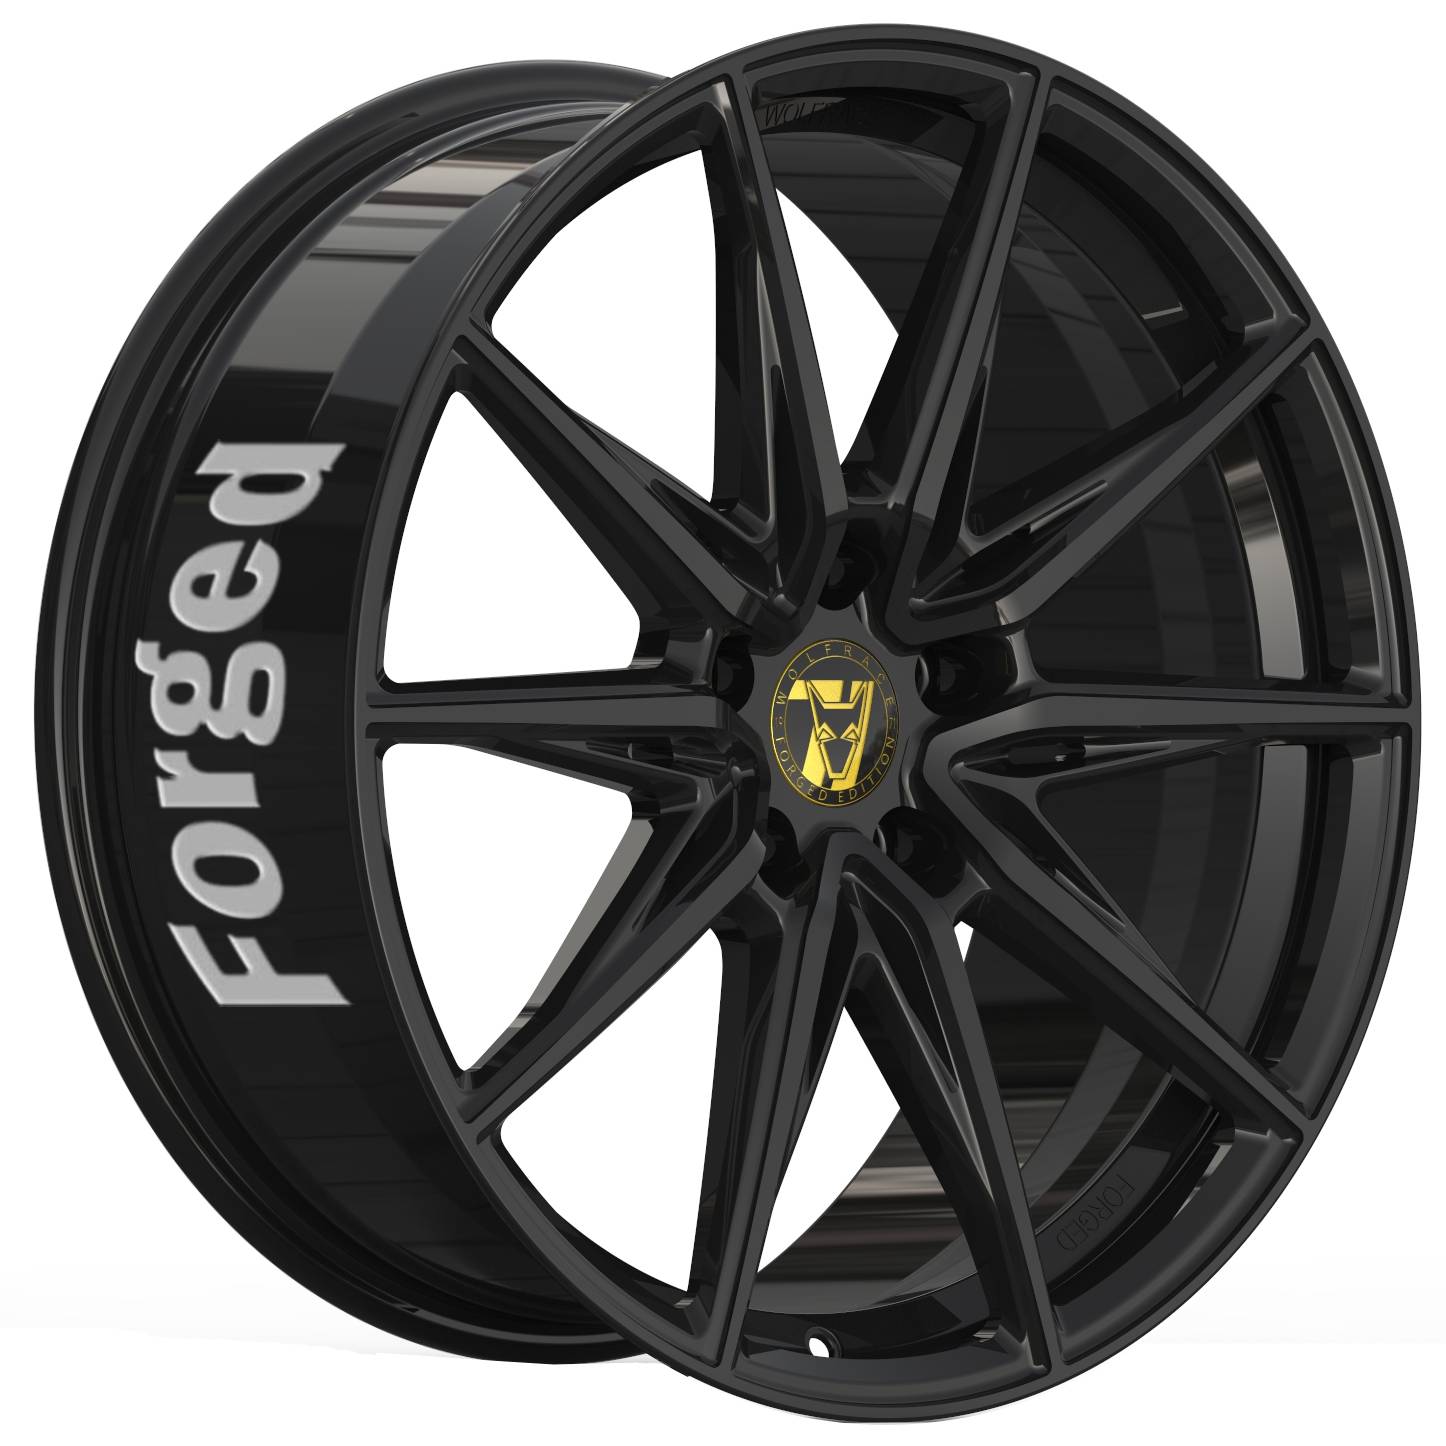 Jantes alu Demon Wheels 71 Forged Edition Urban Racer Forged [10x24] -5x120- ET 40